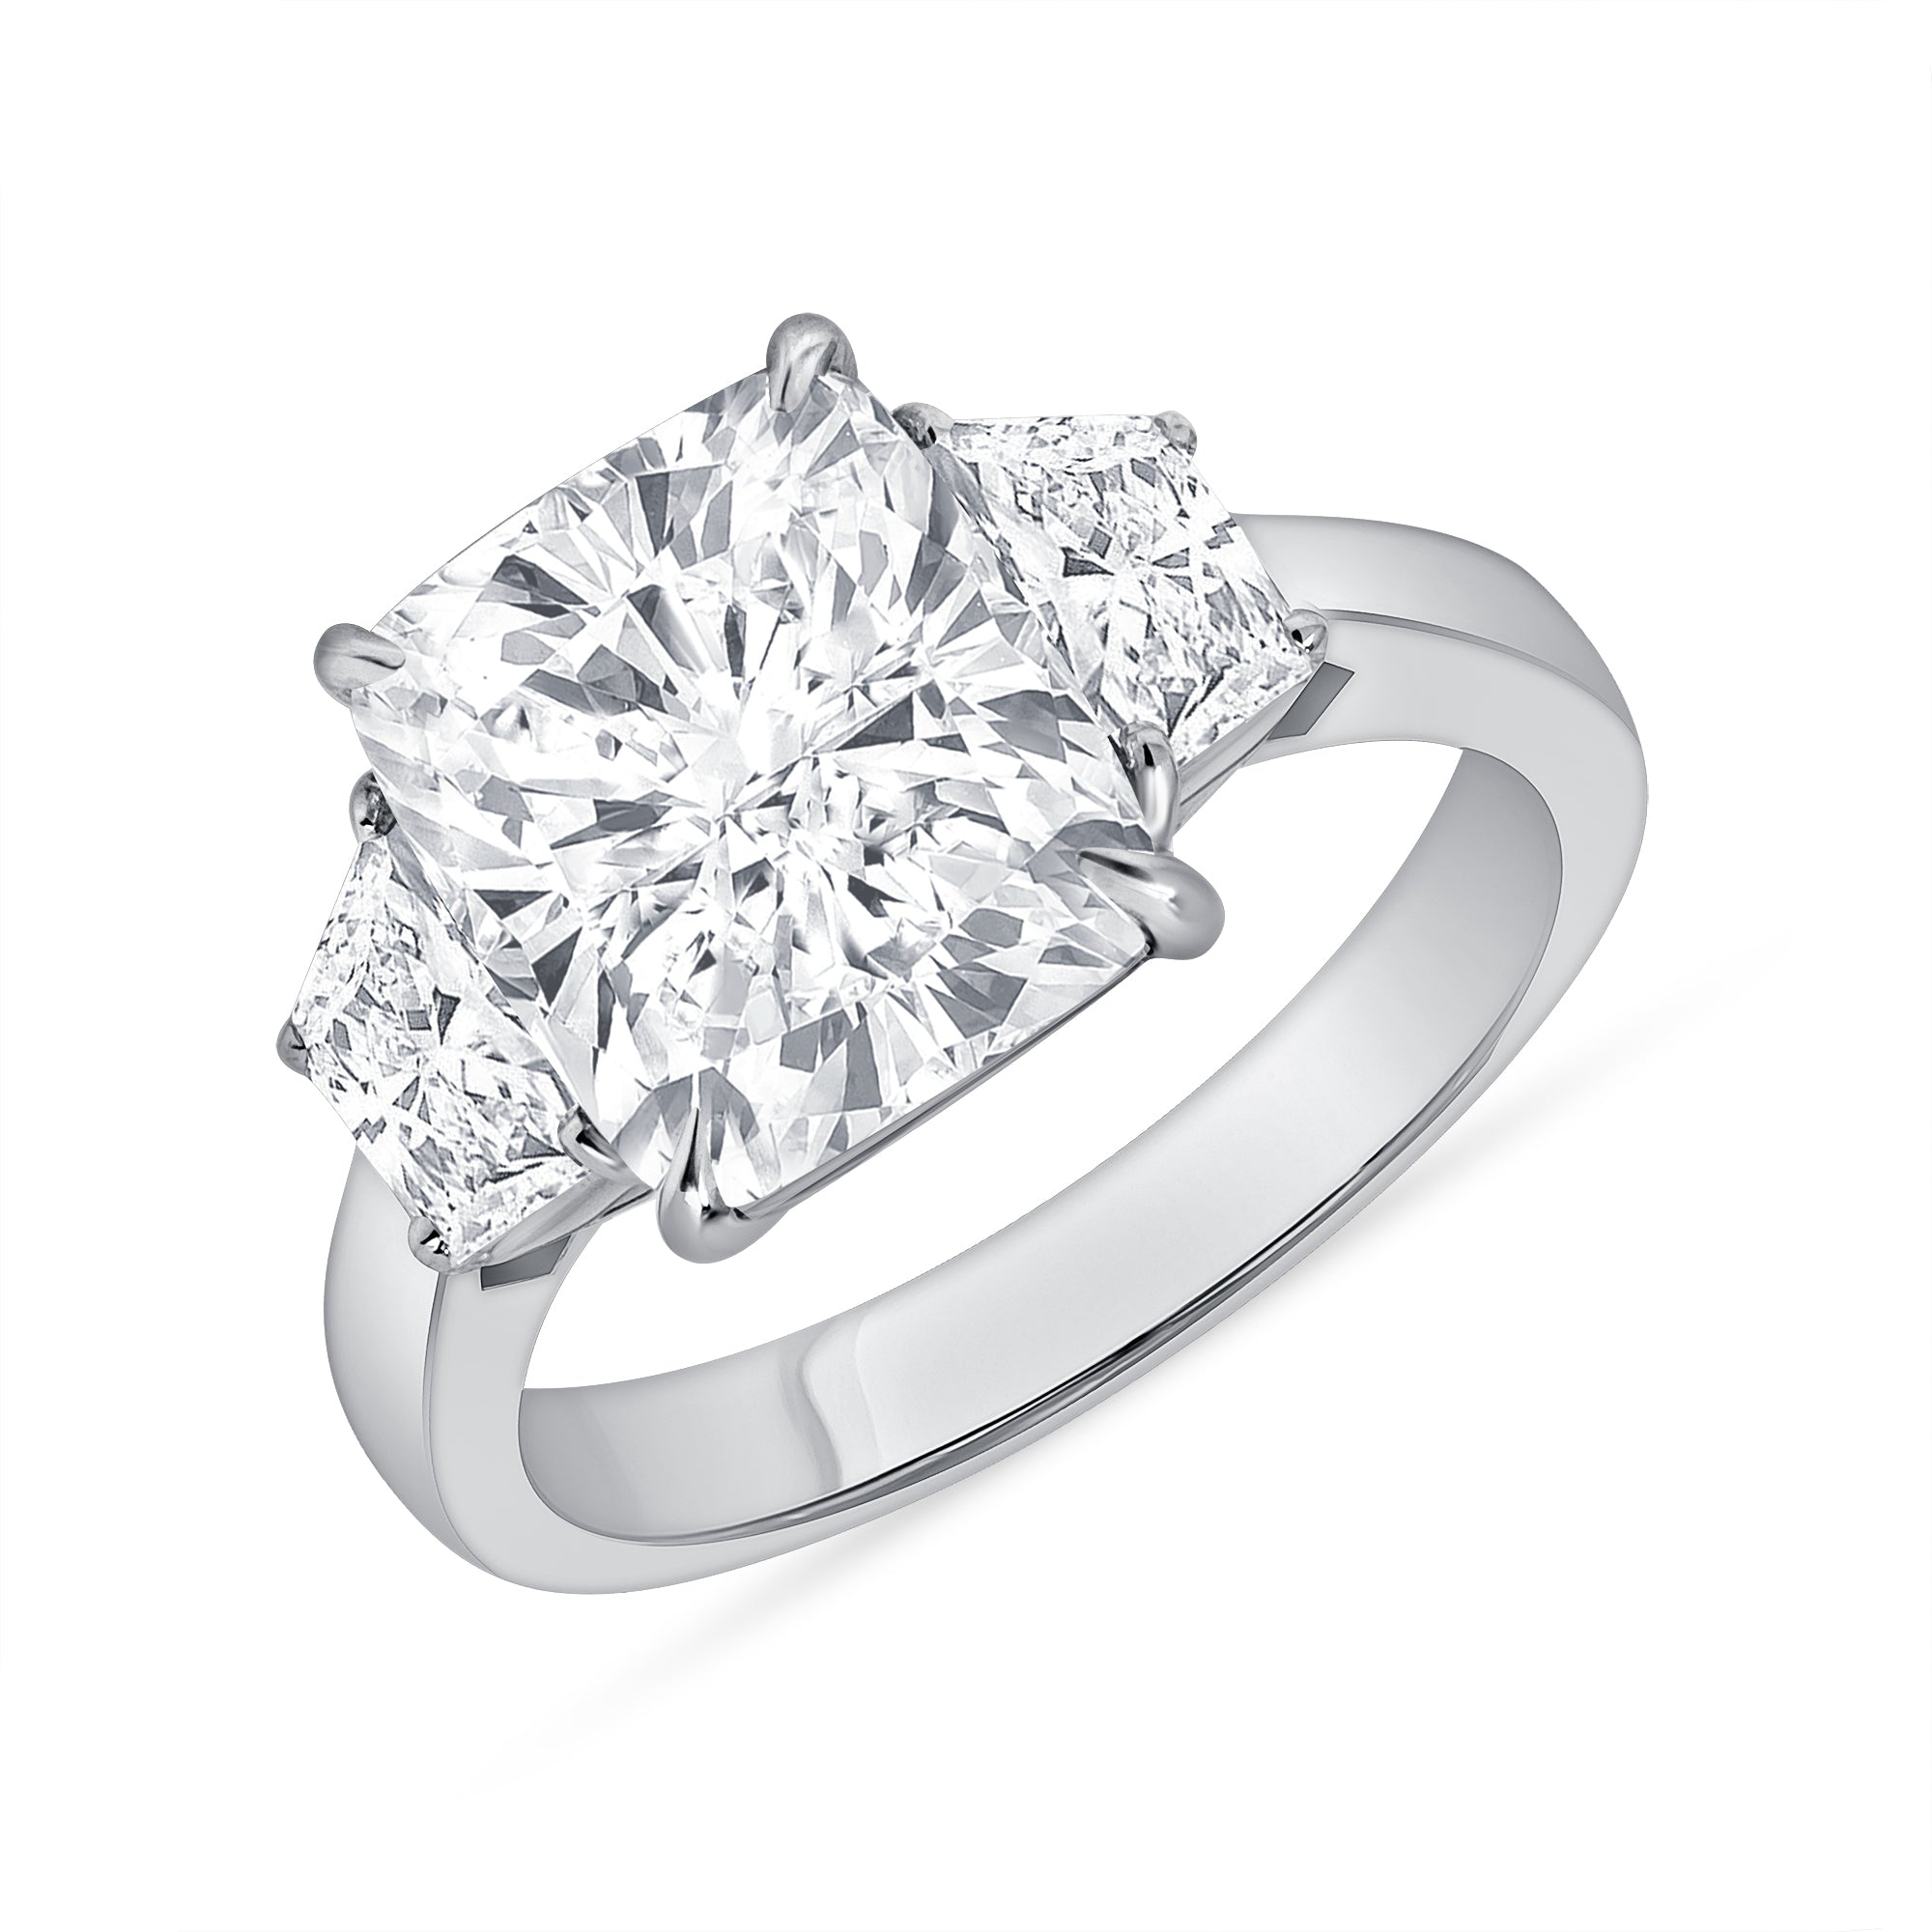 4.05ct Cushion Cut Diamond Three Stone Ring with Trapezoid Side Stones in Platinum Band, GIA Certified